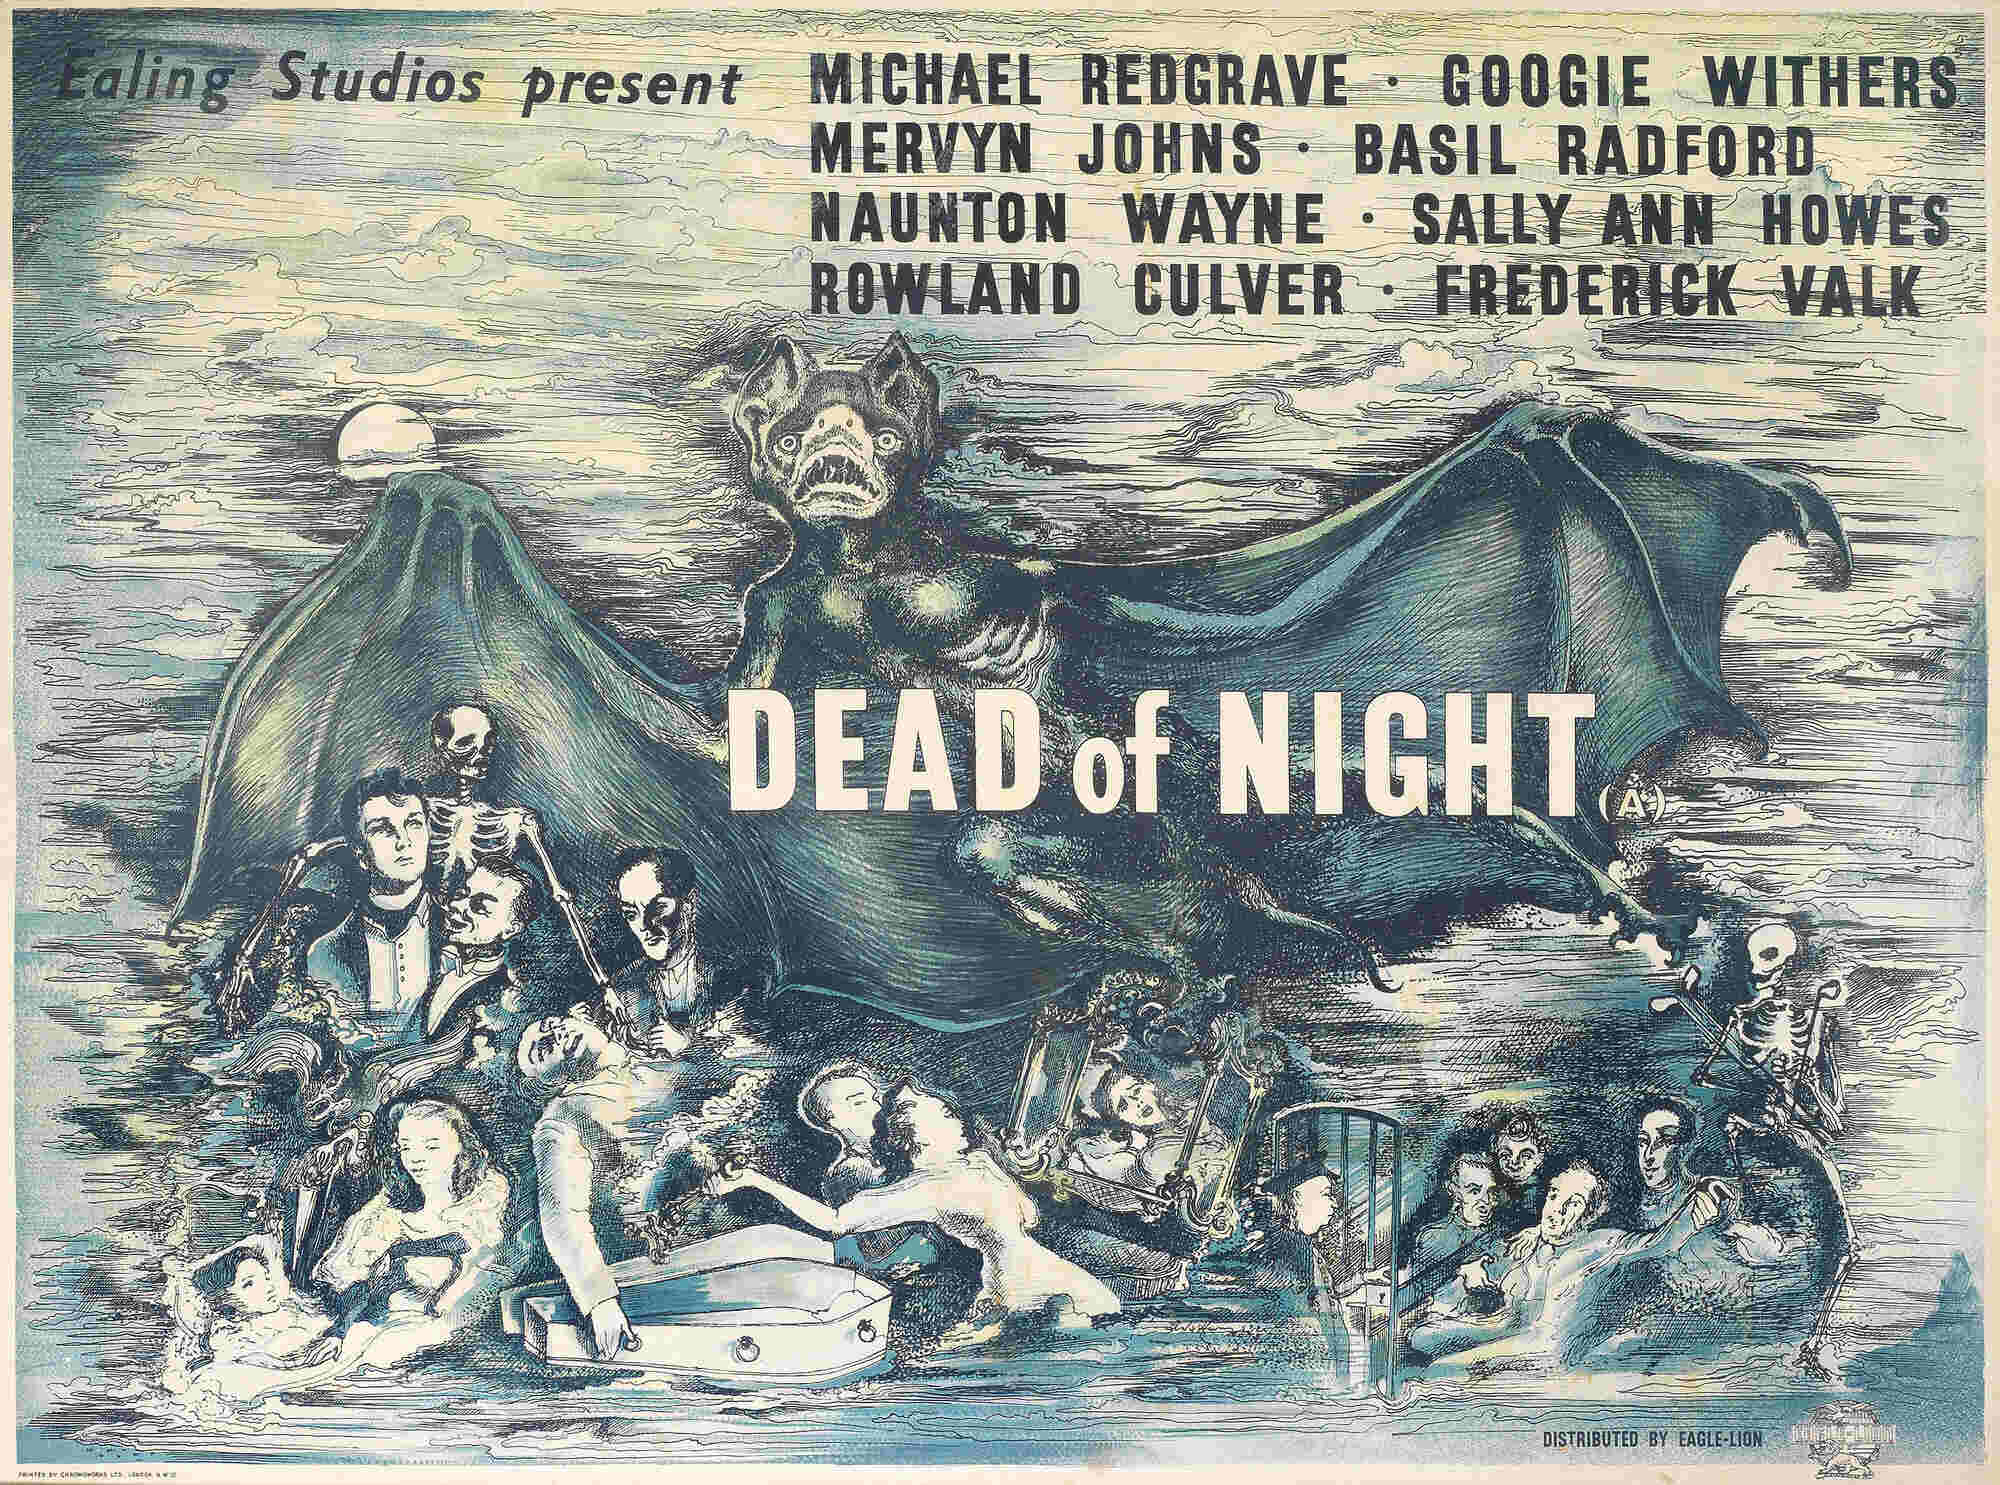 42-facts-about-the-movie-dead-of-night